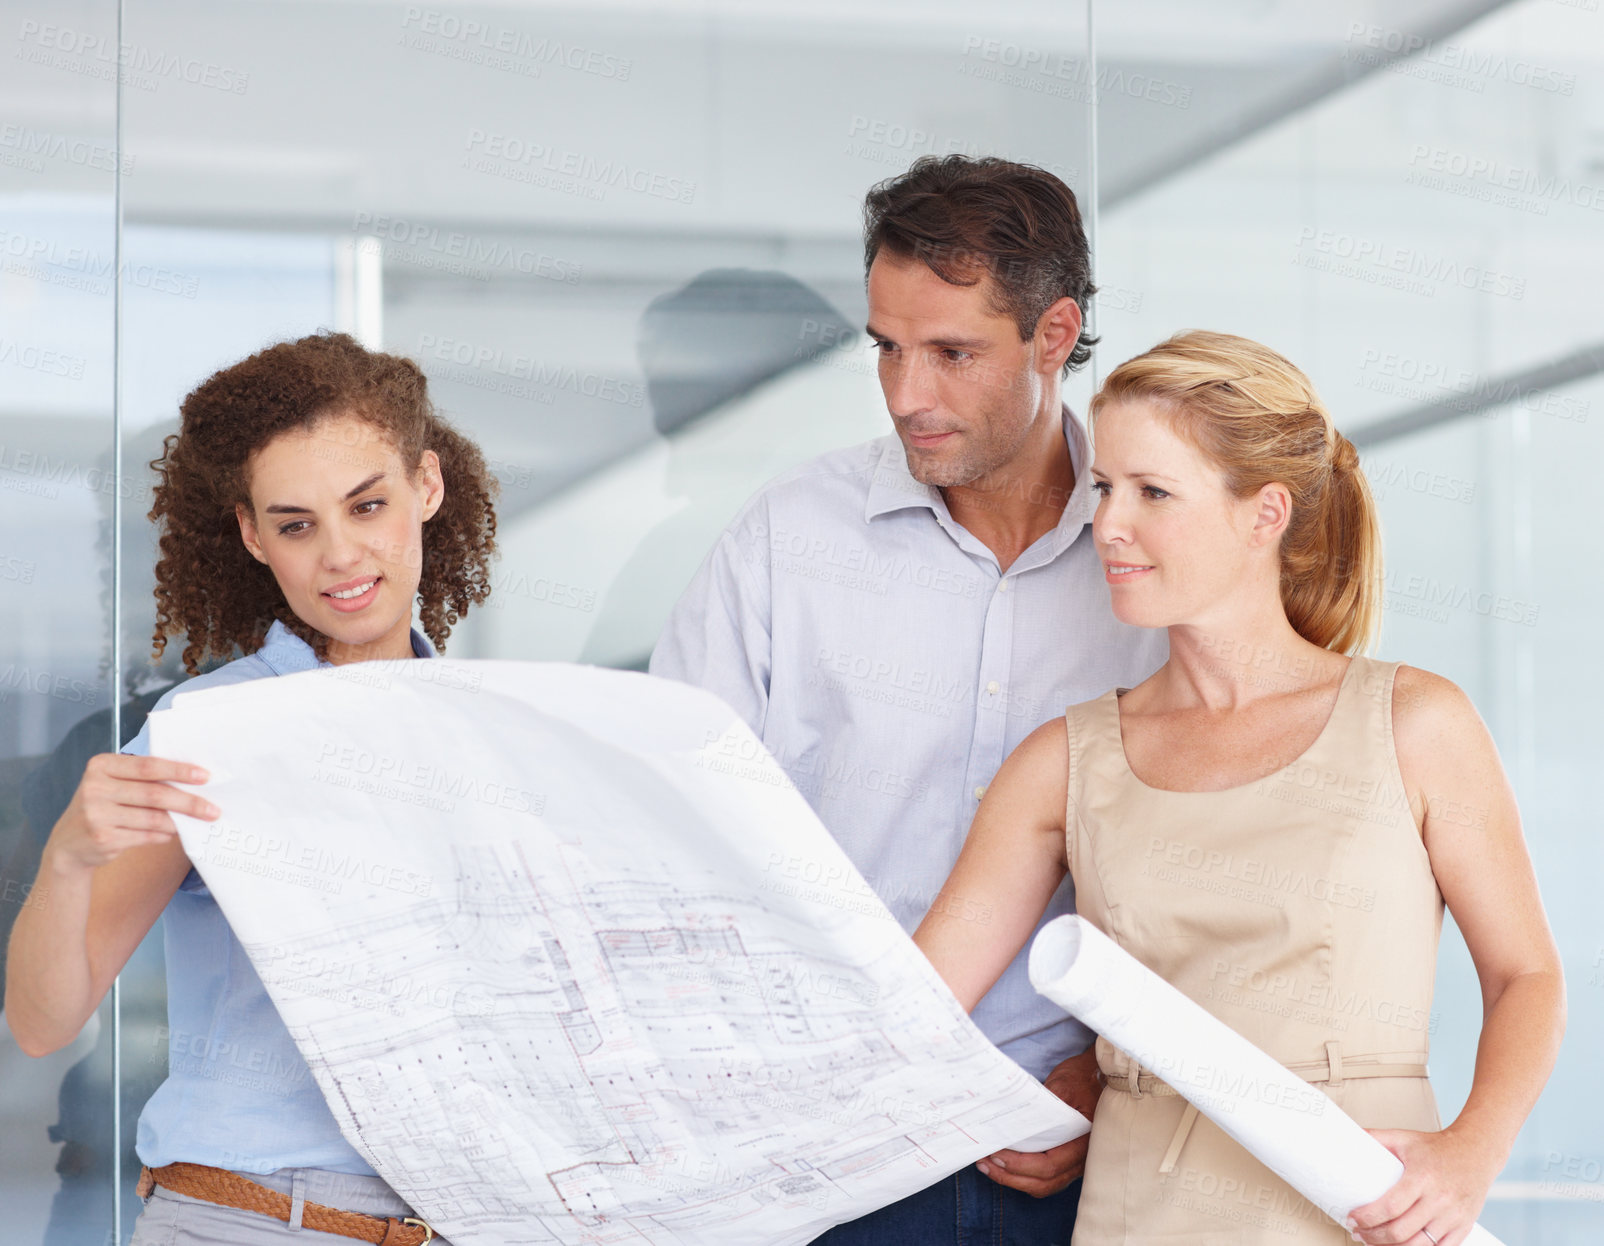 Buy stock photo Architect team, blueprint and planning in construction, meeting or collaboration at office. Group or business people looking at document, paperwork or floor plan for architecture project at workplace